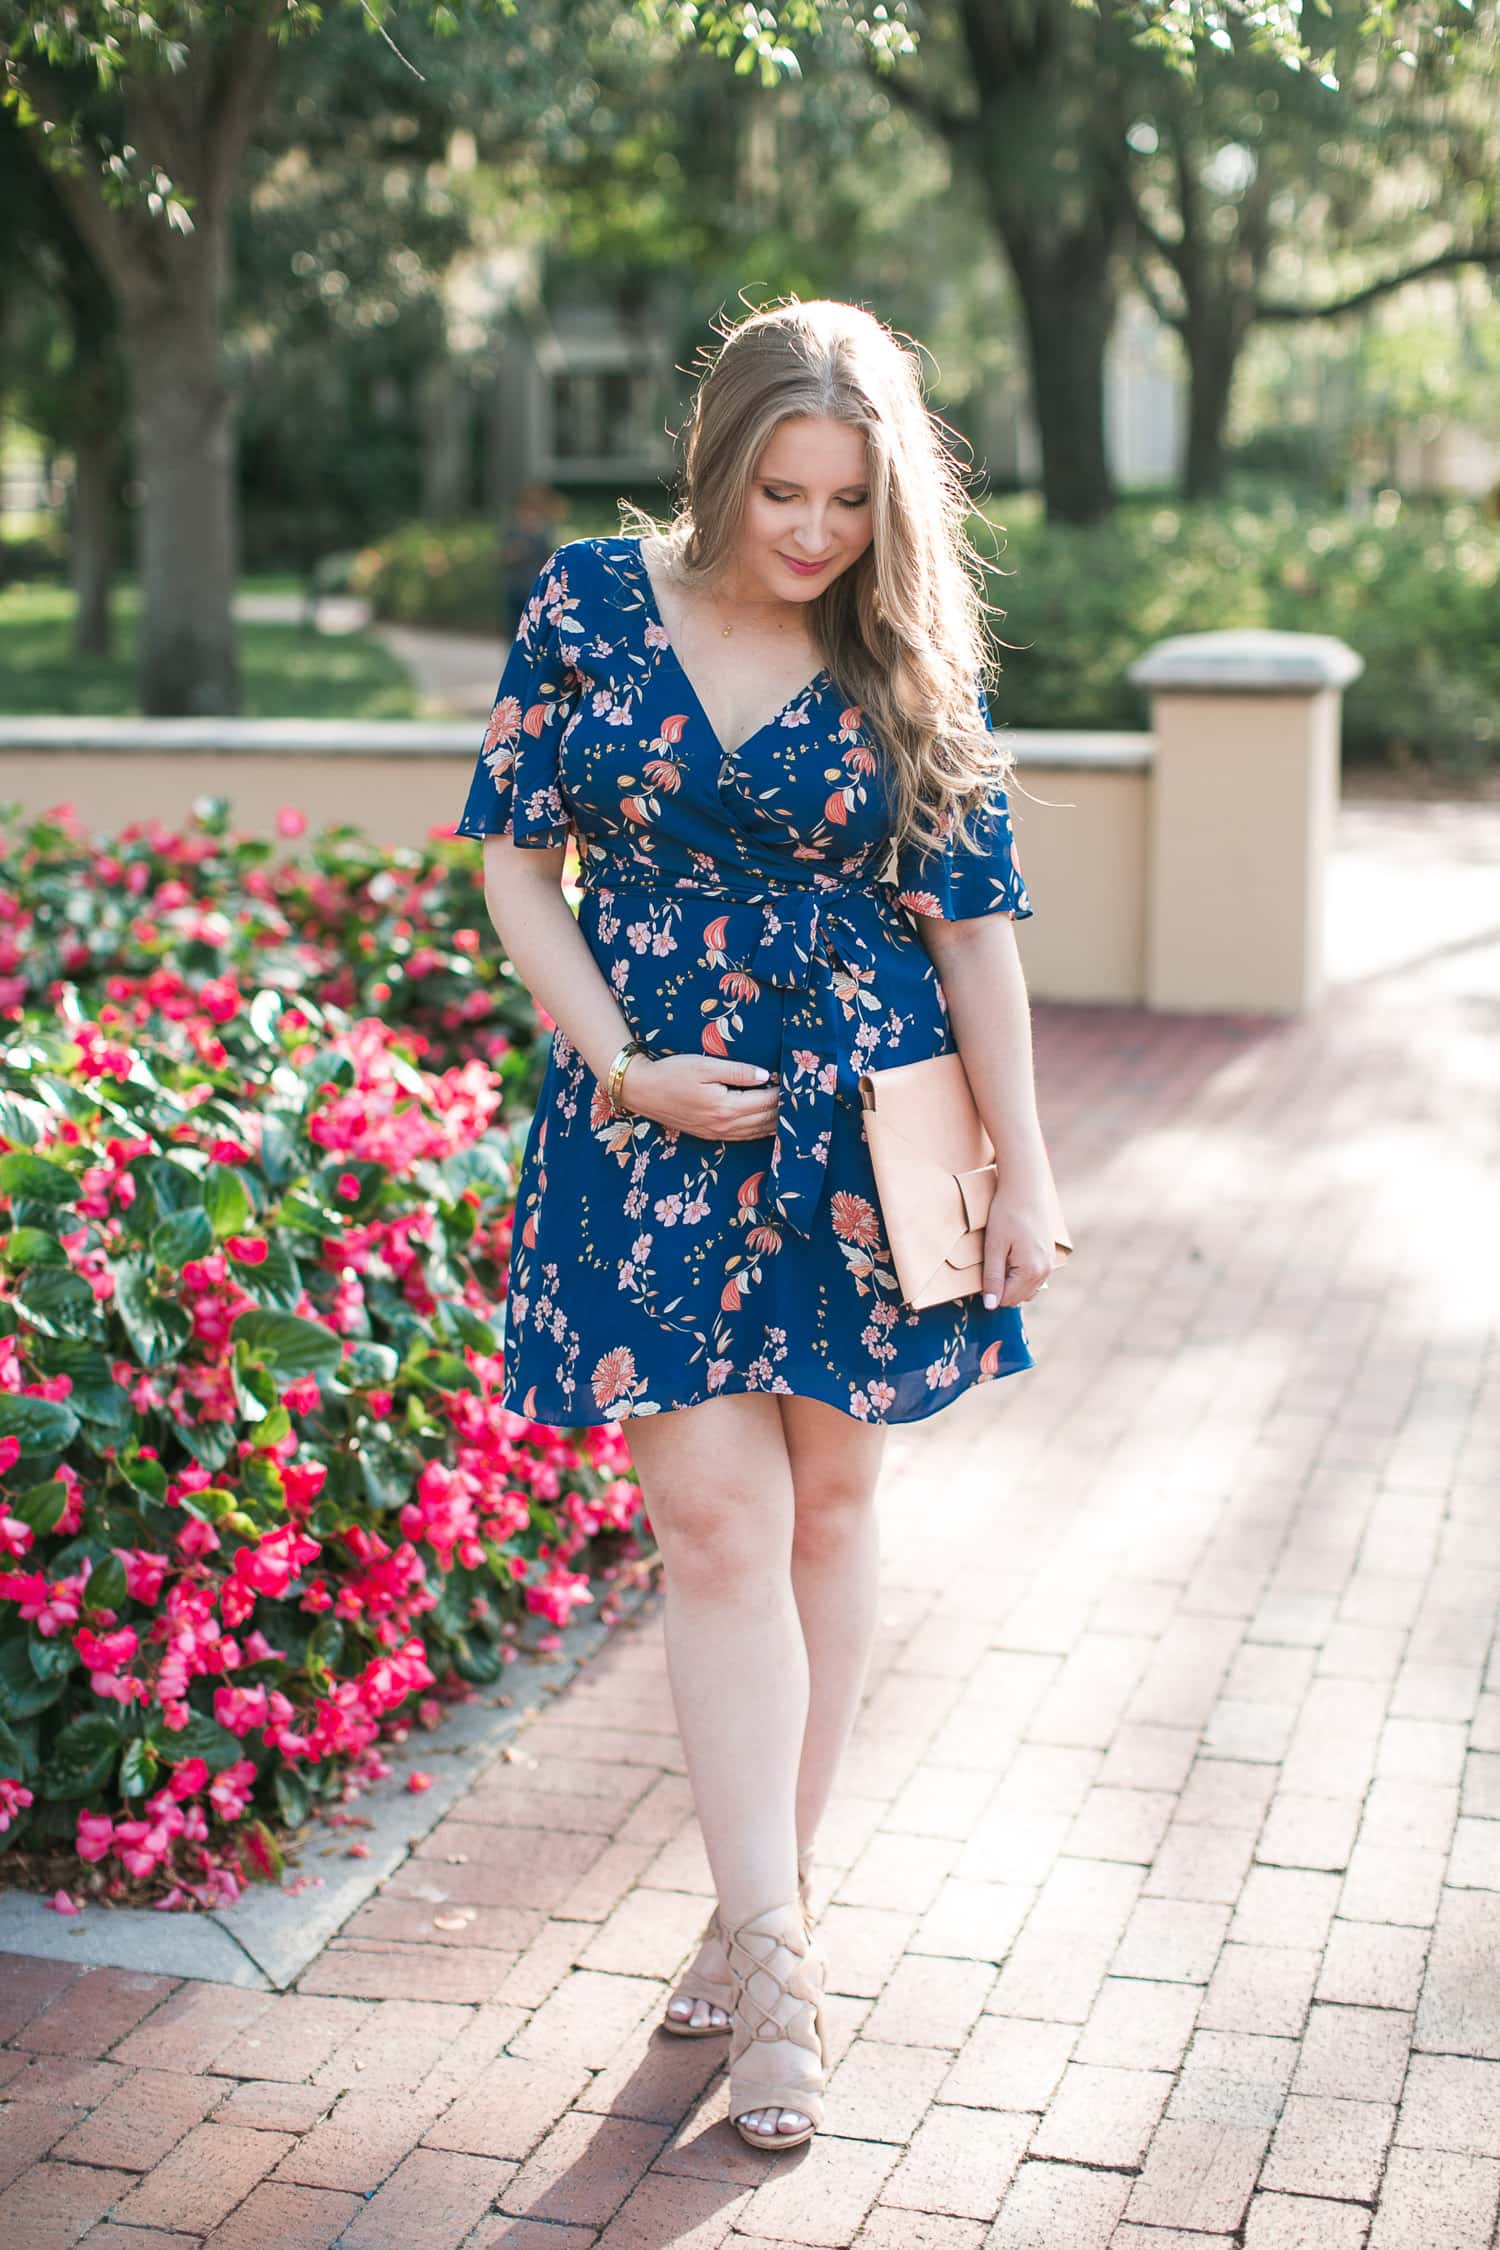 Affordable and maternity-friendly floral wrap dress under $100 styled by Florida fashion and personal style blogger Ashley Brooke Nicholas | BB Dakota Laselle Cherry Blossom Printed Wrap Dress | Maternity Style, maternity fashion, mommy to be, bump style, bump friendly outfits, maternity outfit idea, Sam Edelman Yardley Heeled Sandals, Banana Republic Bow Clutch, nude lace-up sandals, affordable outfit ideas, preppy fashion, preppy style